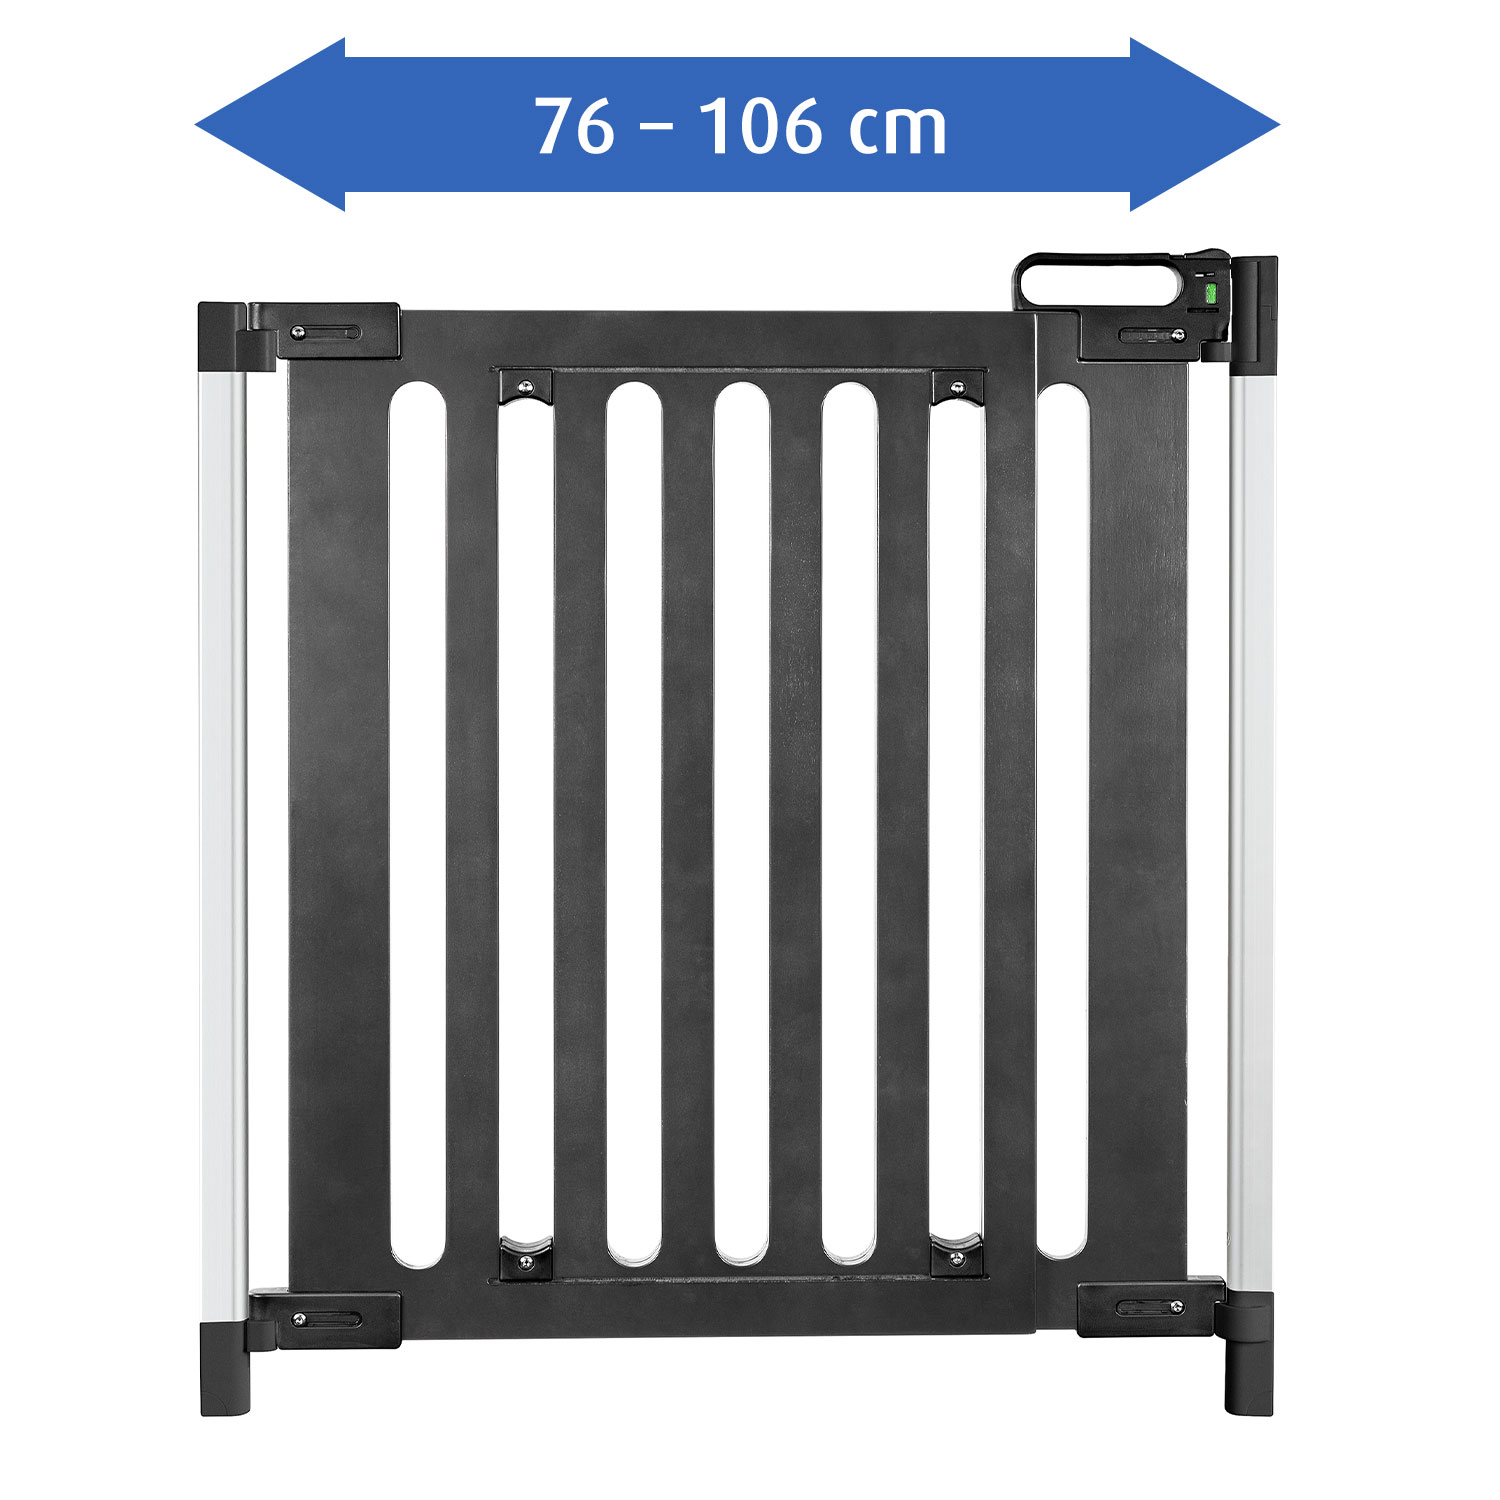 Trend wall mounted gate for gateway widths from 76 - 106 cm